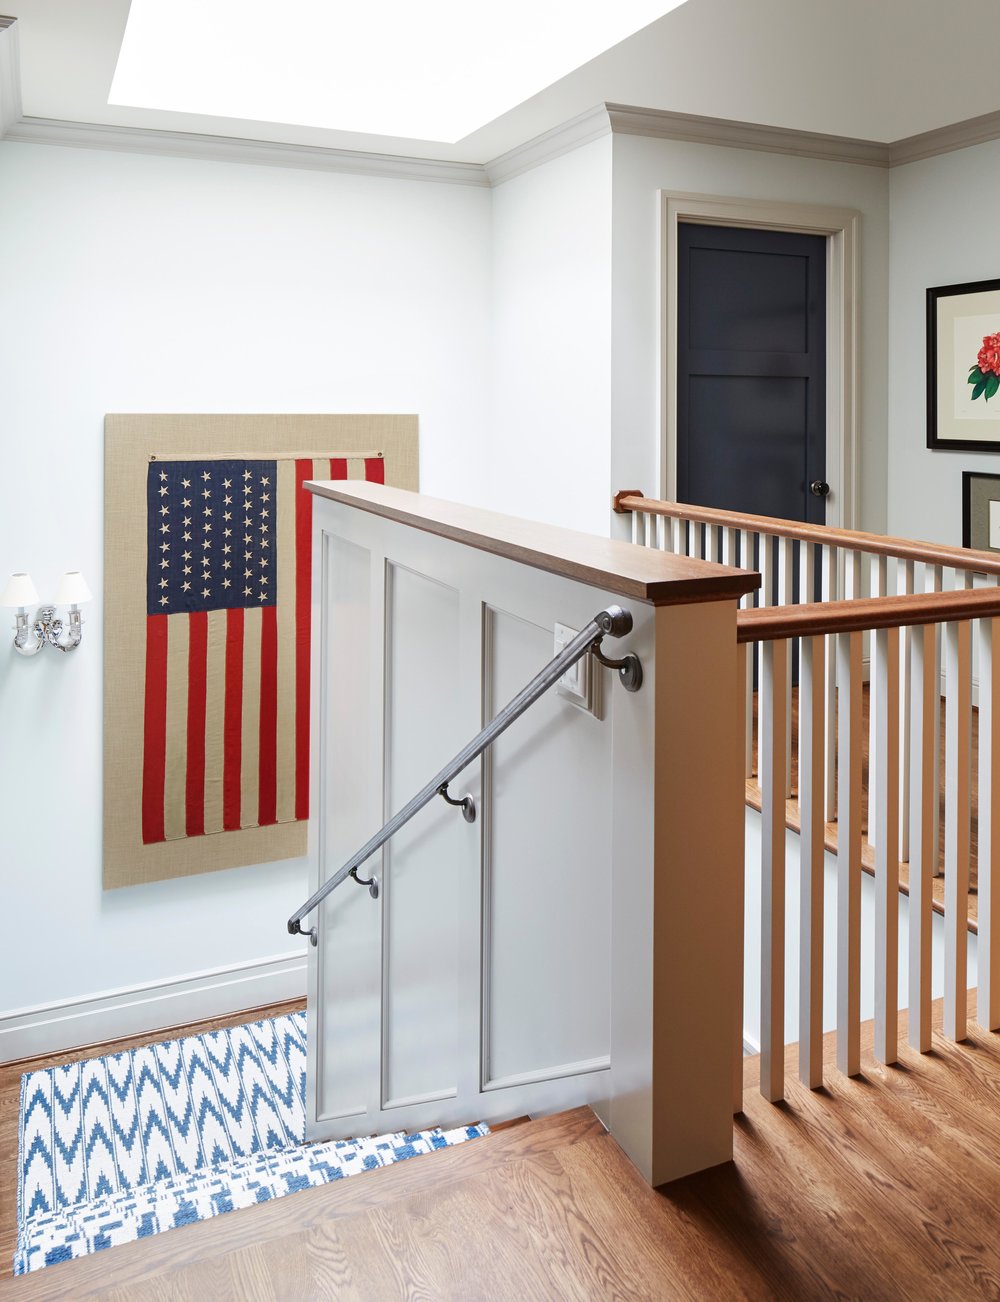 American flag framed on wall near staircase. Come see more interior design inspiration from Elizabeth Drake. Photo by Werner Straube. #interiordesign #classicdesign #traditionaldecor #housetour #elizabethdrake